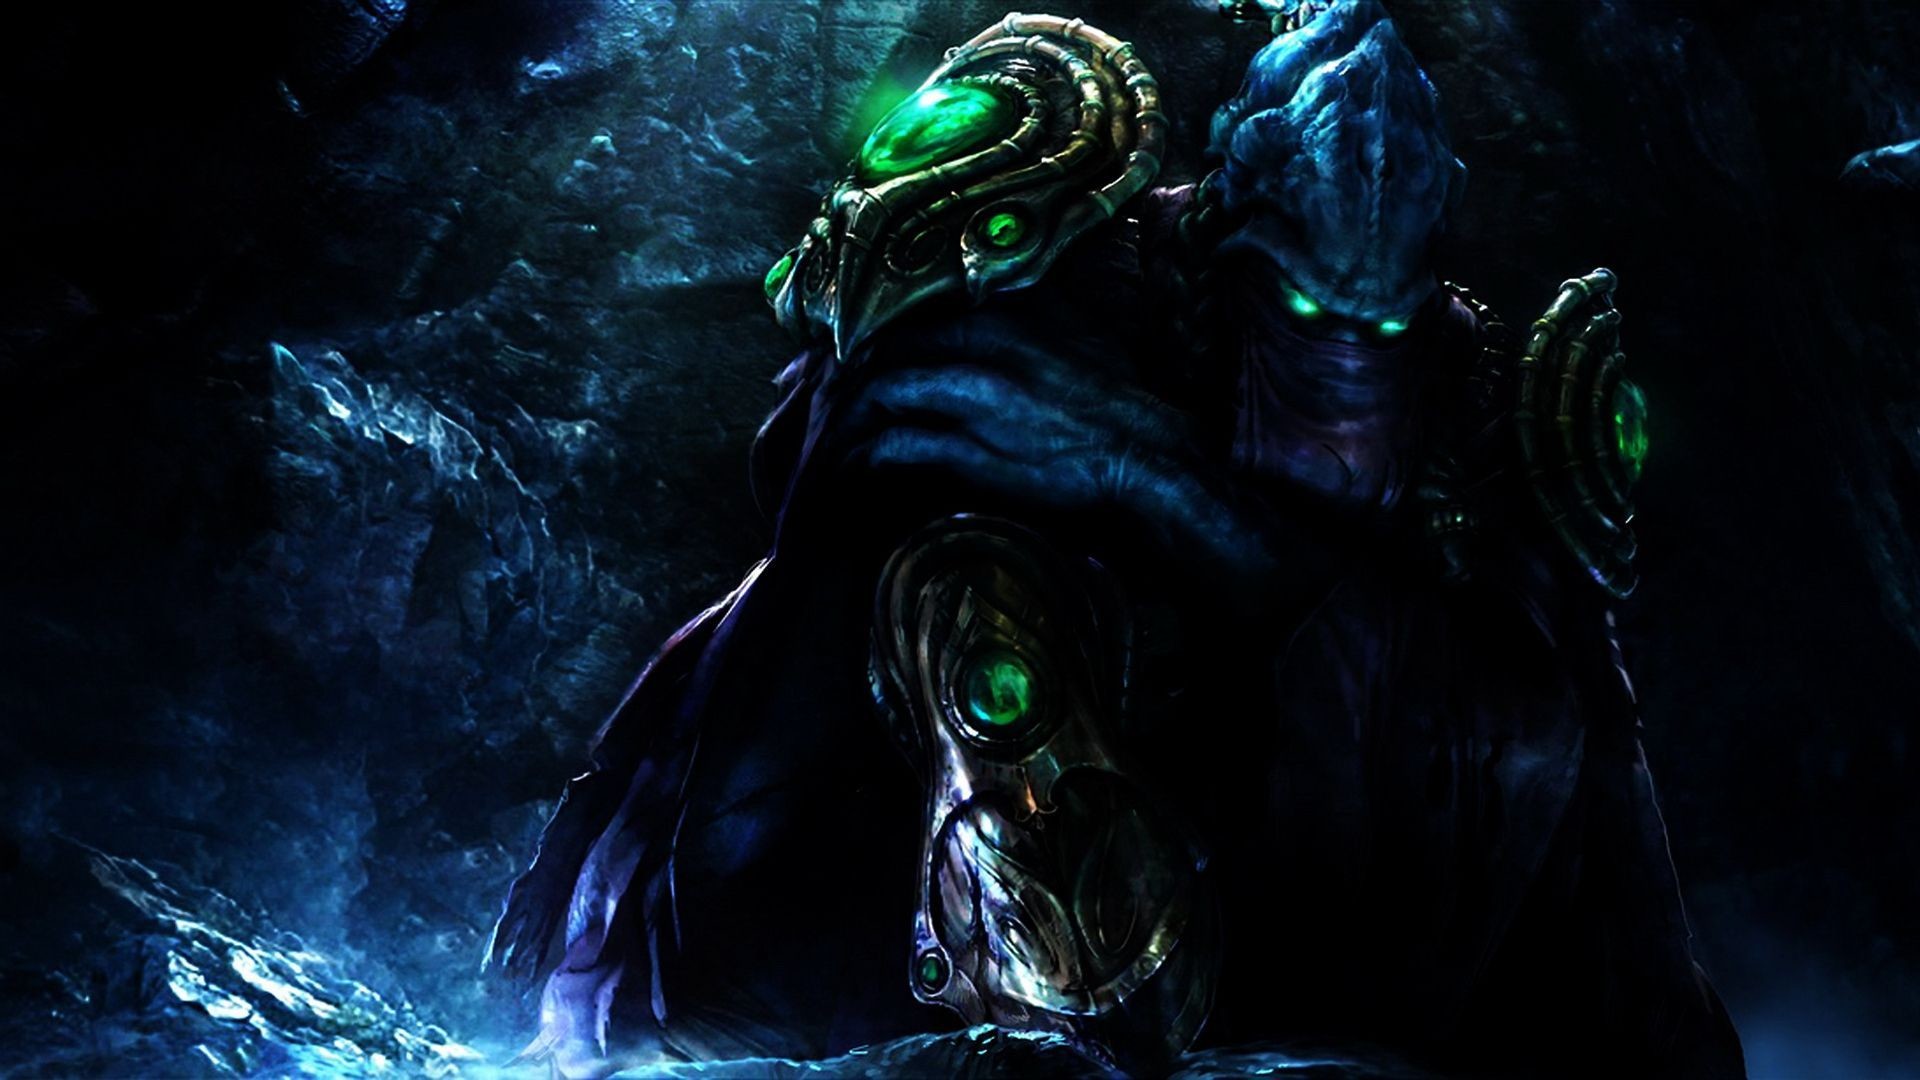 1920x1080 Starcraft 2, game, artwork, wings,  HD Wallpaper and FREE .